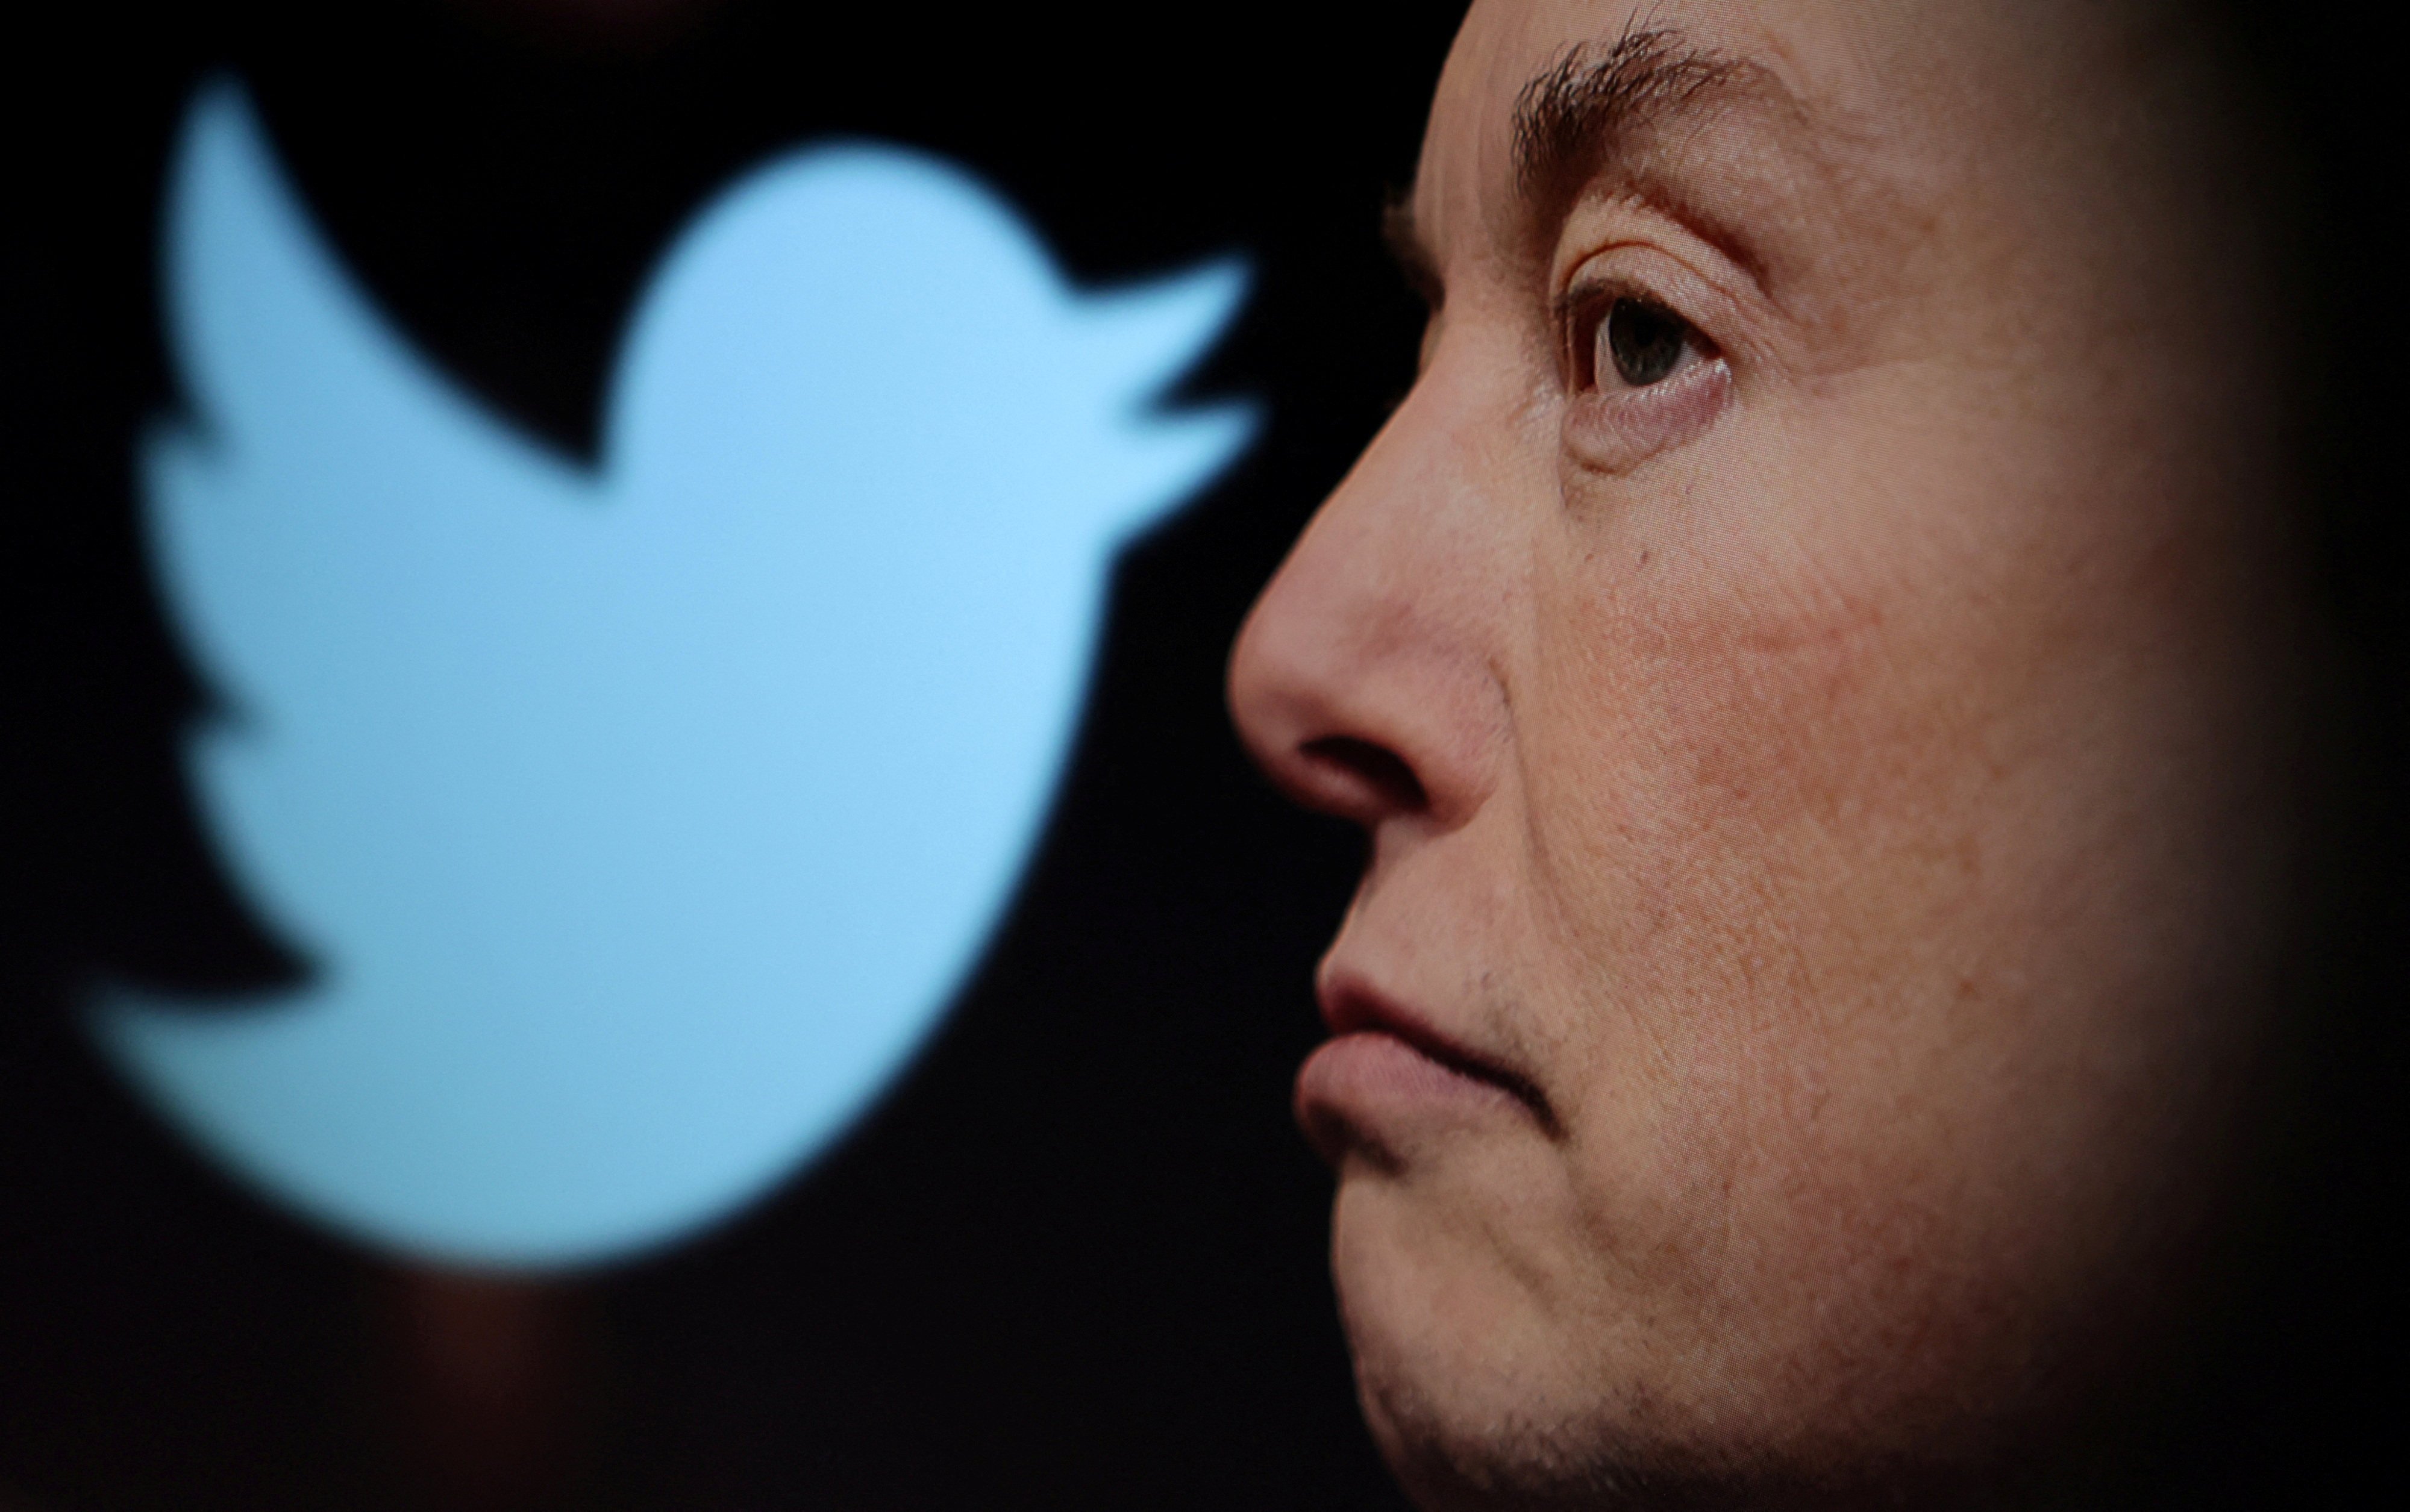 Elon Musk has fully owned Twitter since October 27 and has repeatedly courted controversy as CEO. Photo: Reuters